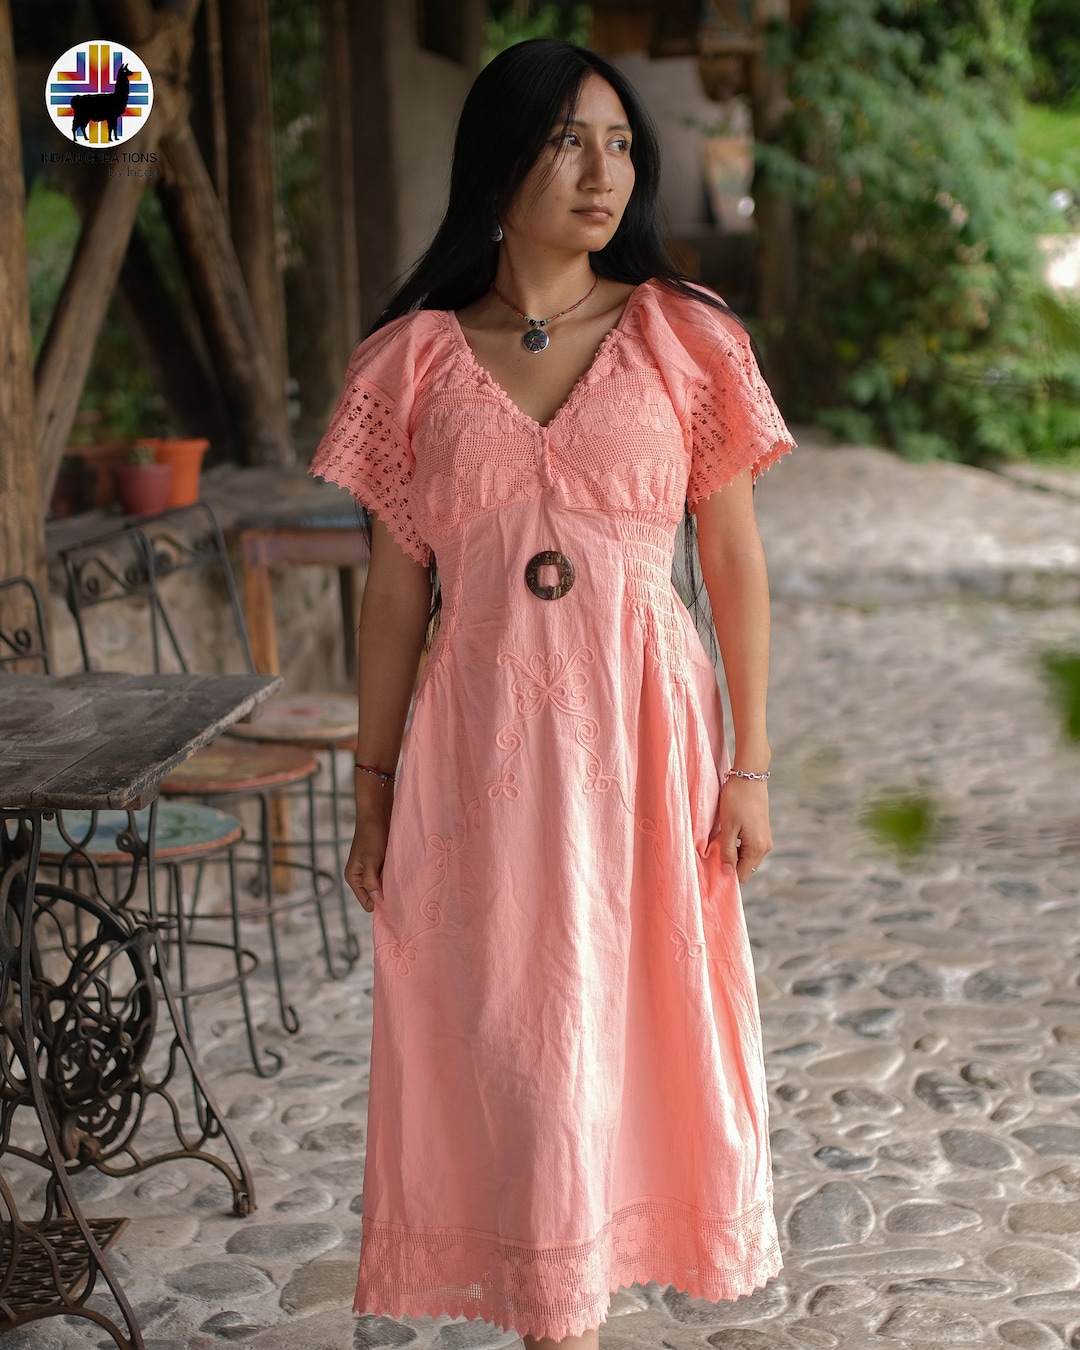 Hand-stitched Cotton Dress narcissus. Bohemian Style. Super Comfortable ...